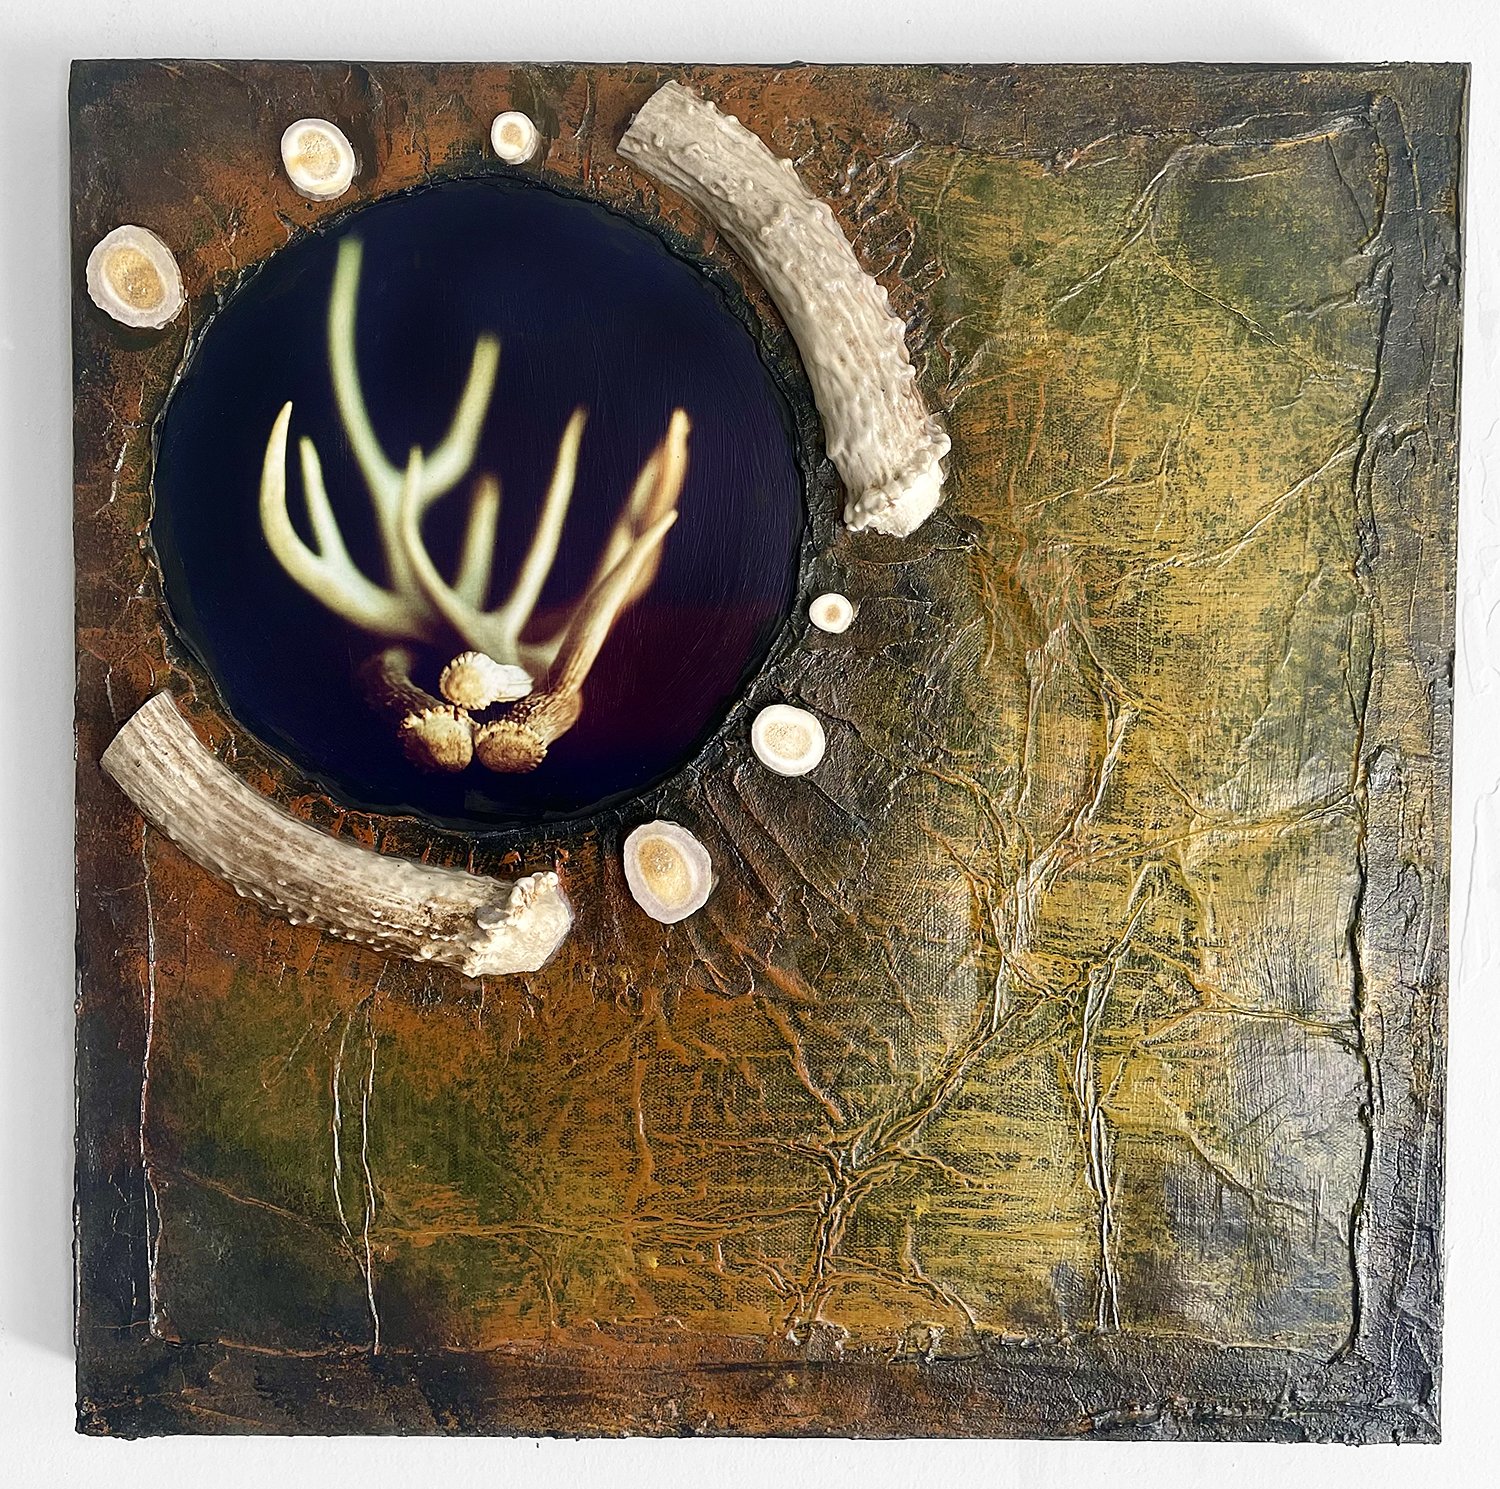 Feathered Antler - I love when you bring me cool things to paint